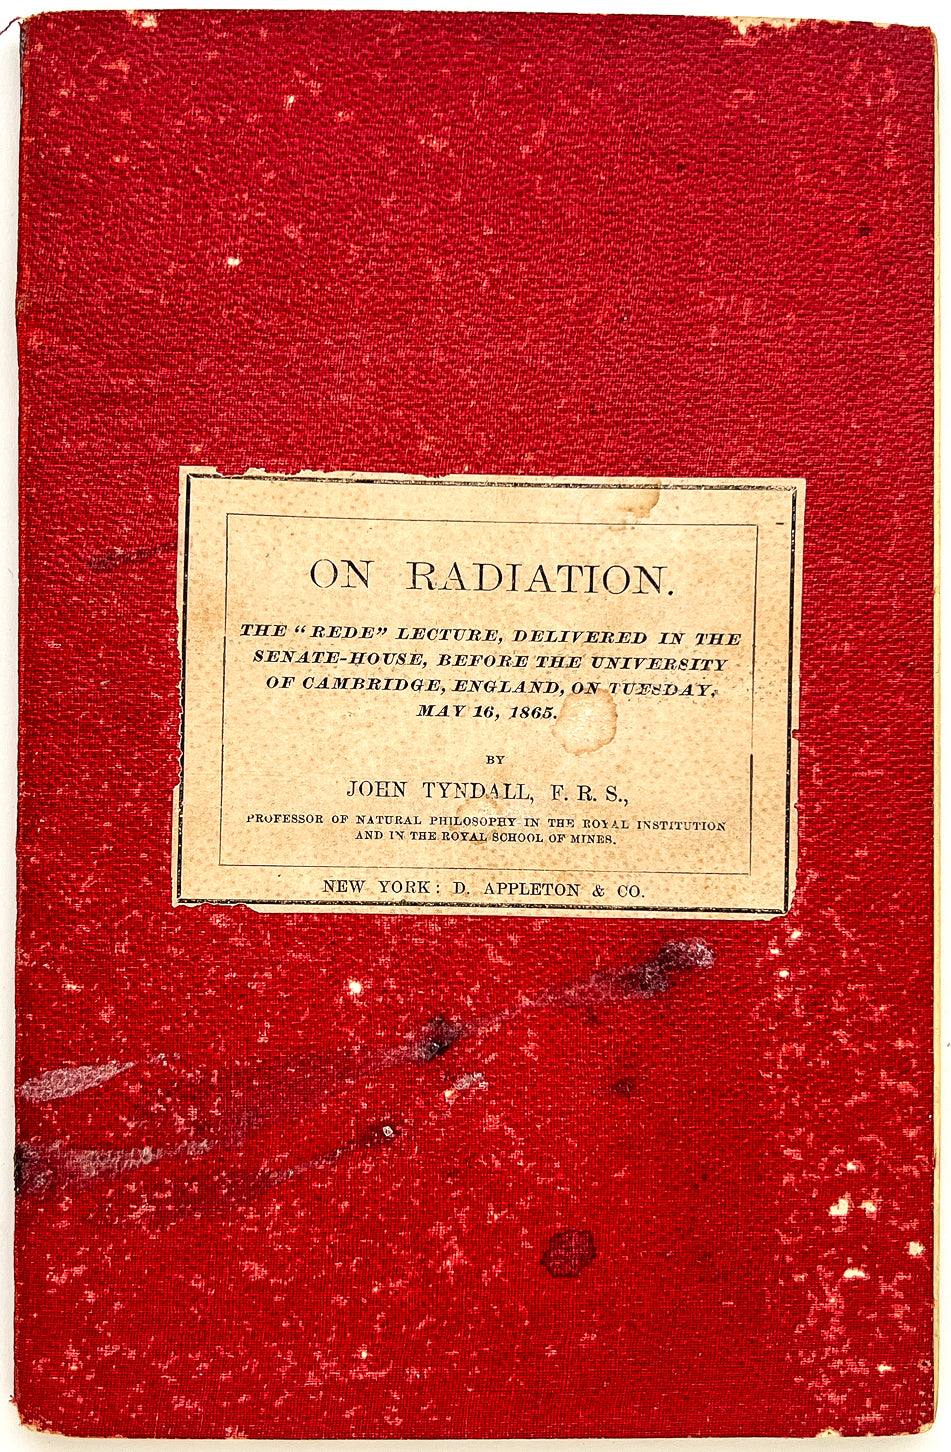 On Radiation: The "Rede" Lecture, Delivered in the Senate House, Before the University of Cambridge, England, on Tuesday, May 16, 1865